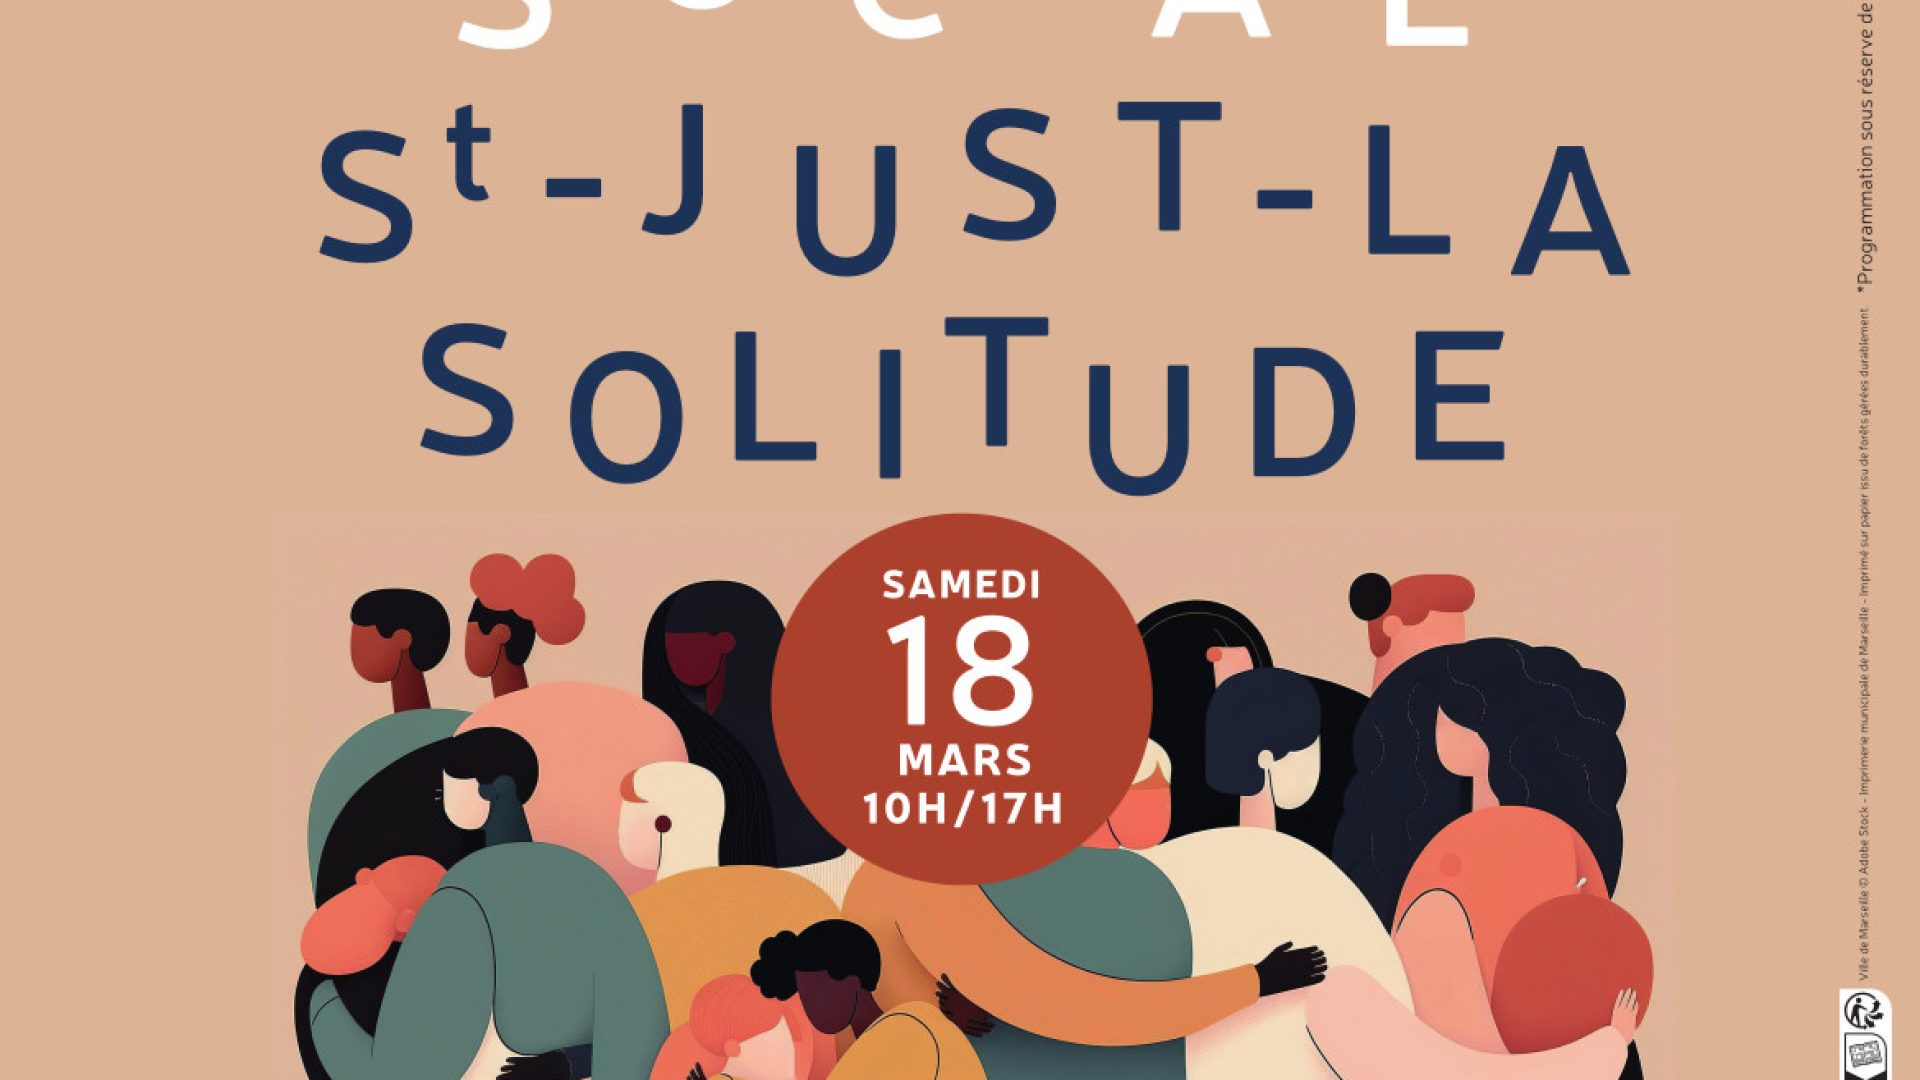 Affiche_inauguration Centre social_St_Just